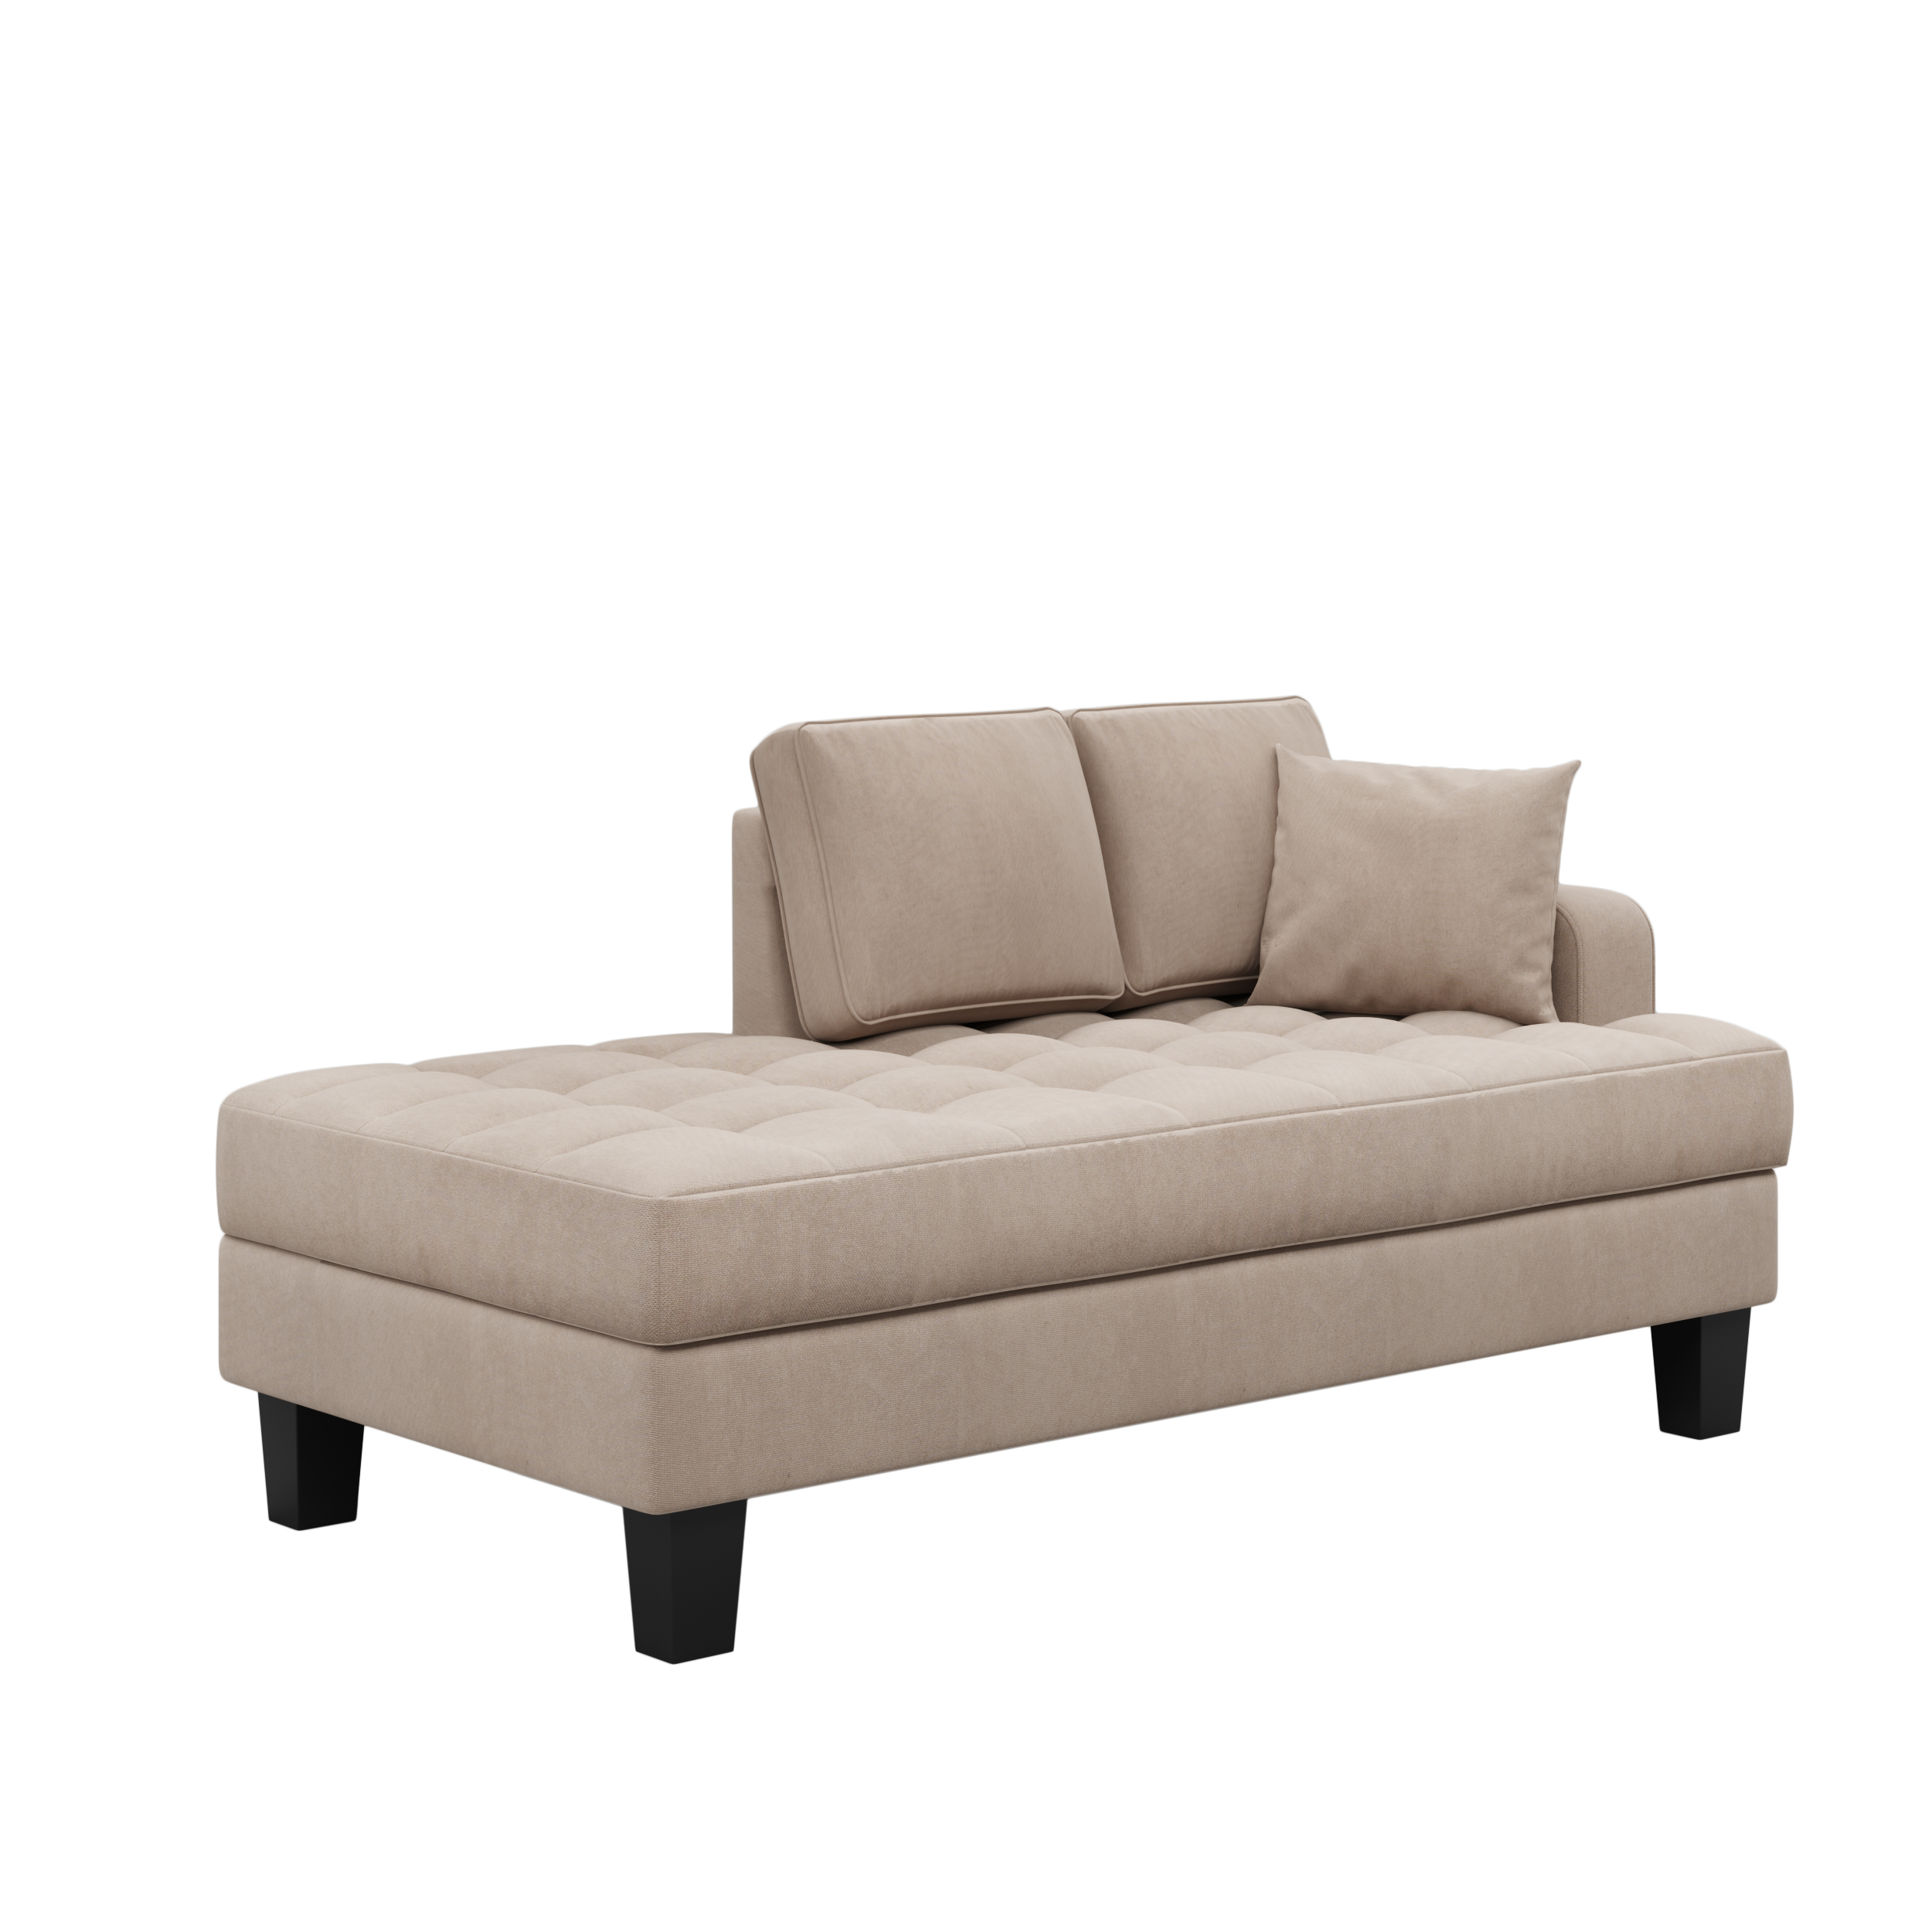 64" Fabric Chaise Lounge,Toss Pillow included